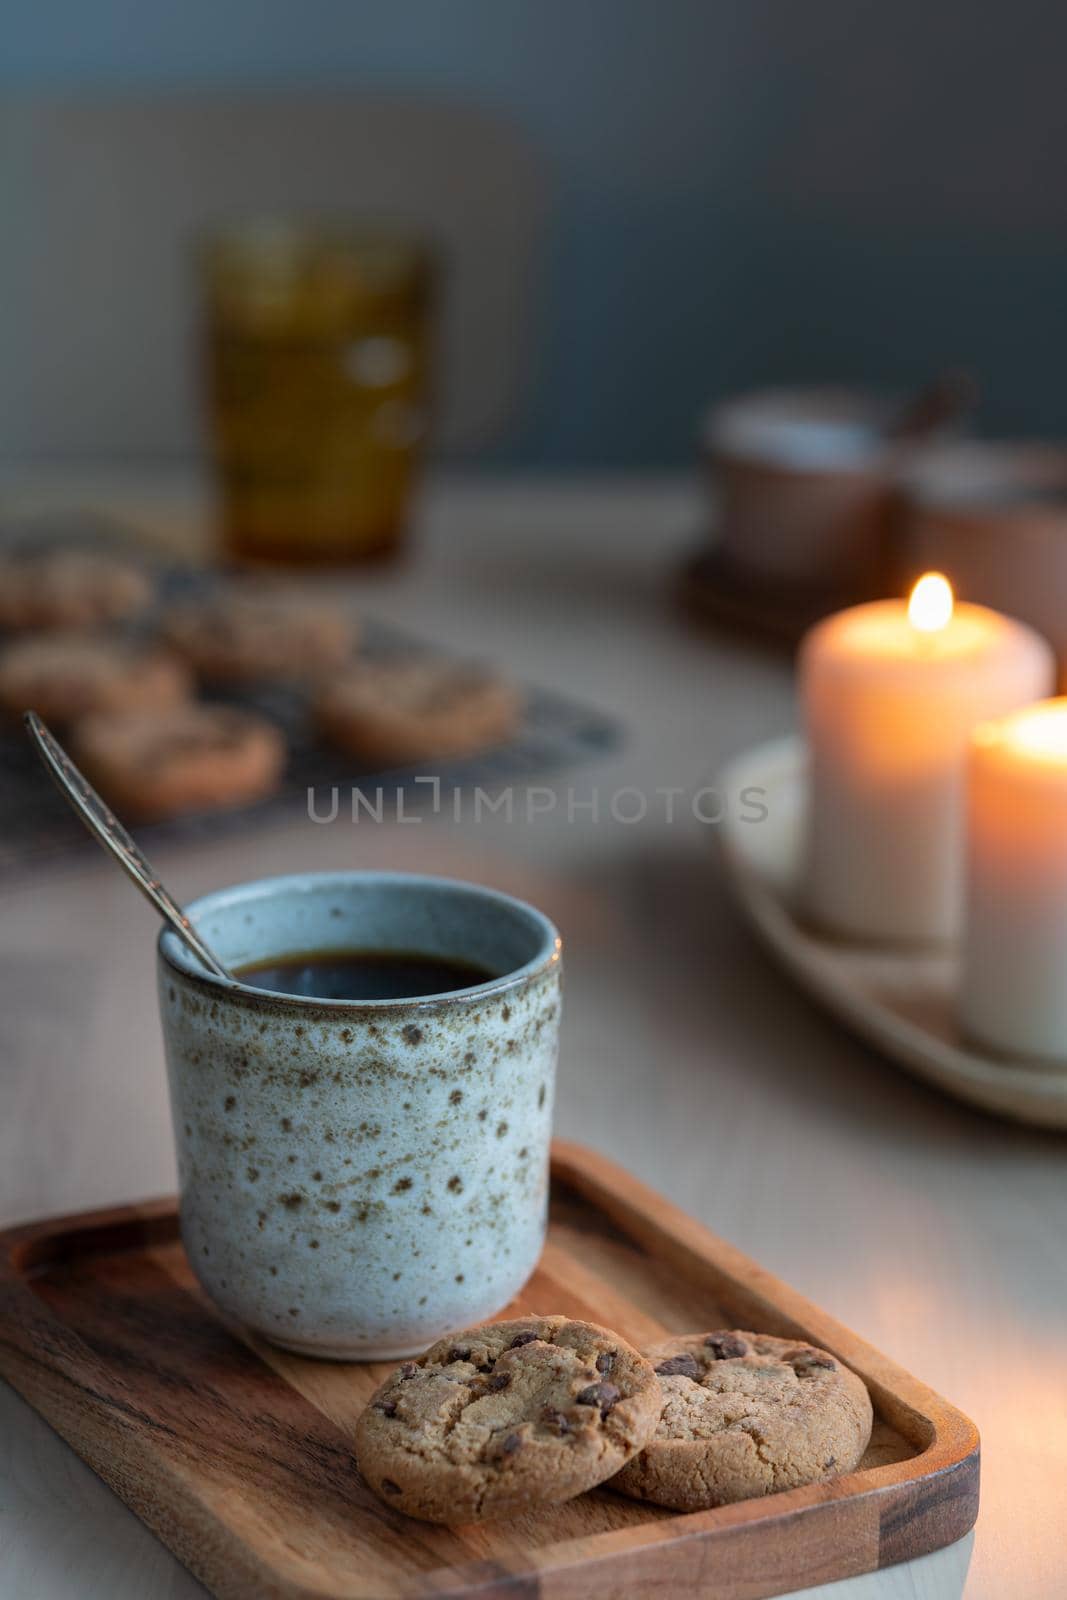 Christmas background with Chocolate chip cookies, cup of tea. Cozy evening, mug of drink, holiday decorations, candles lights bokeh. Vertical still life twilight